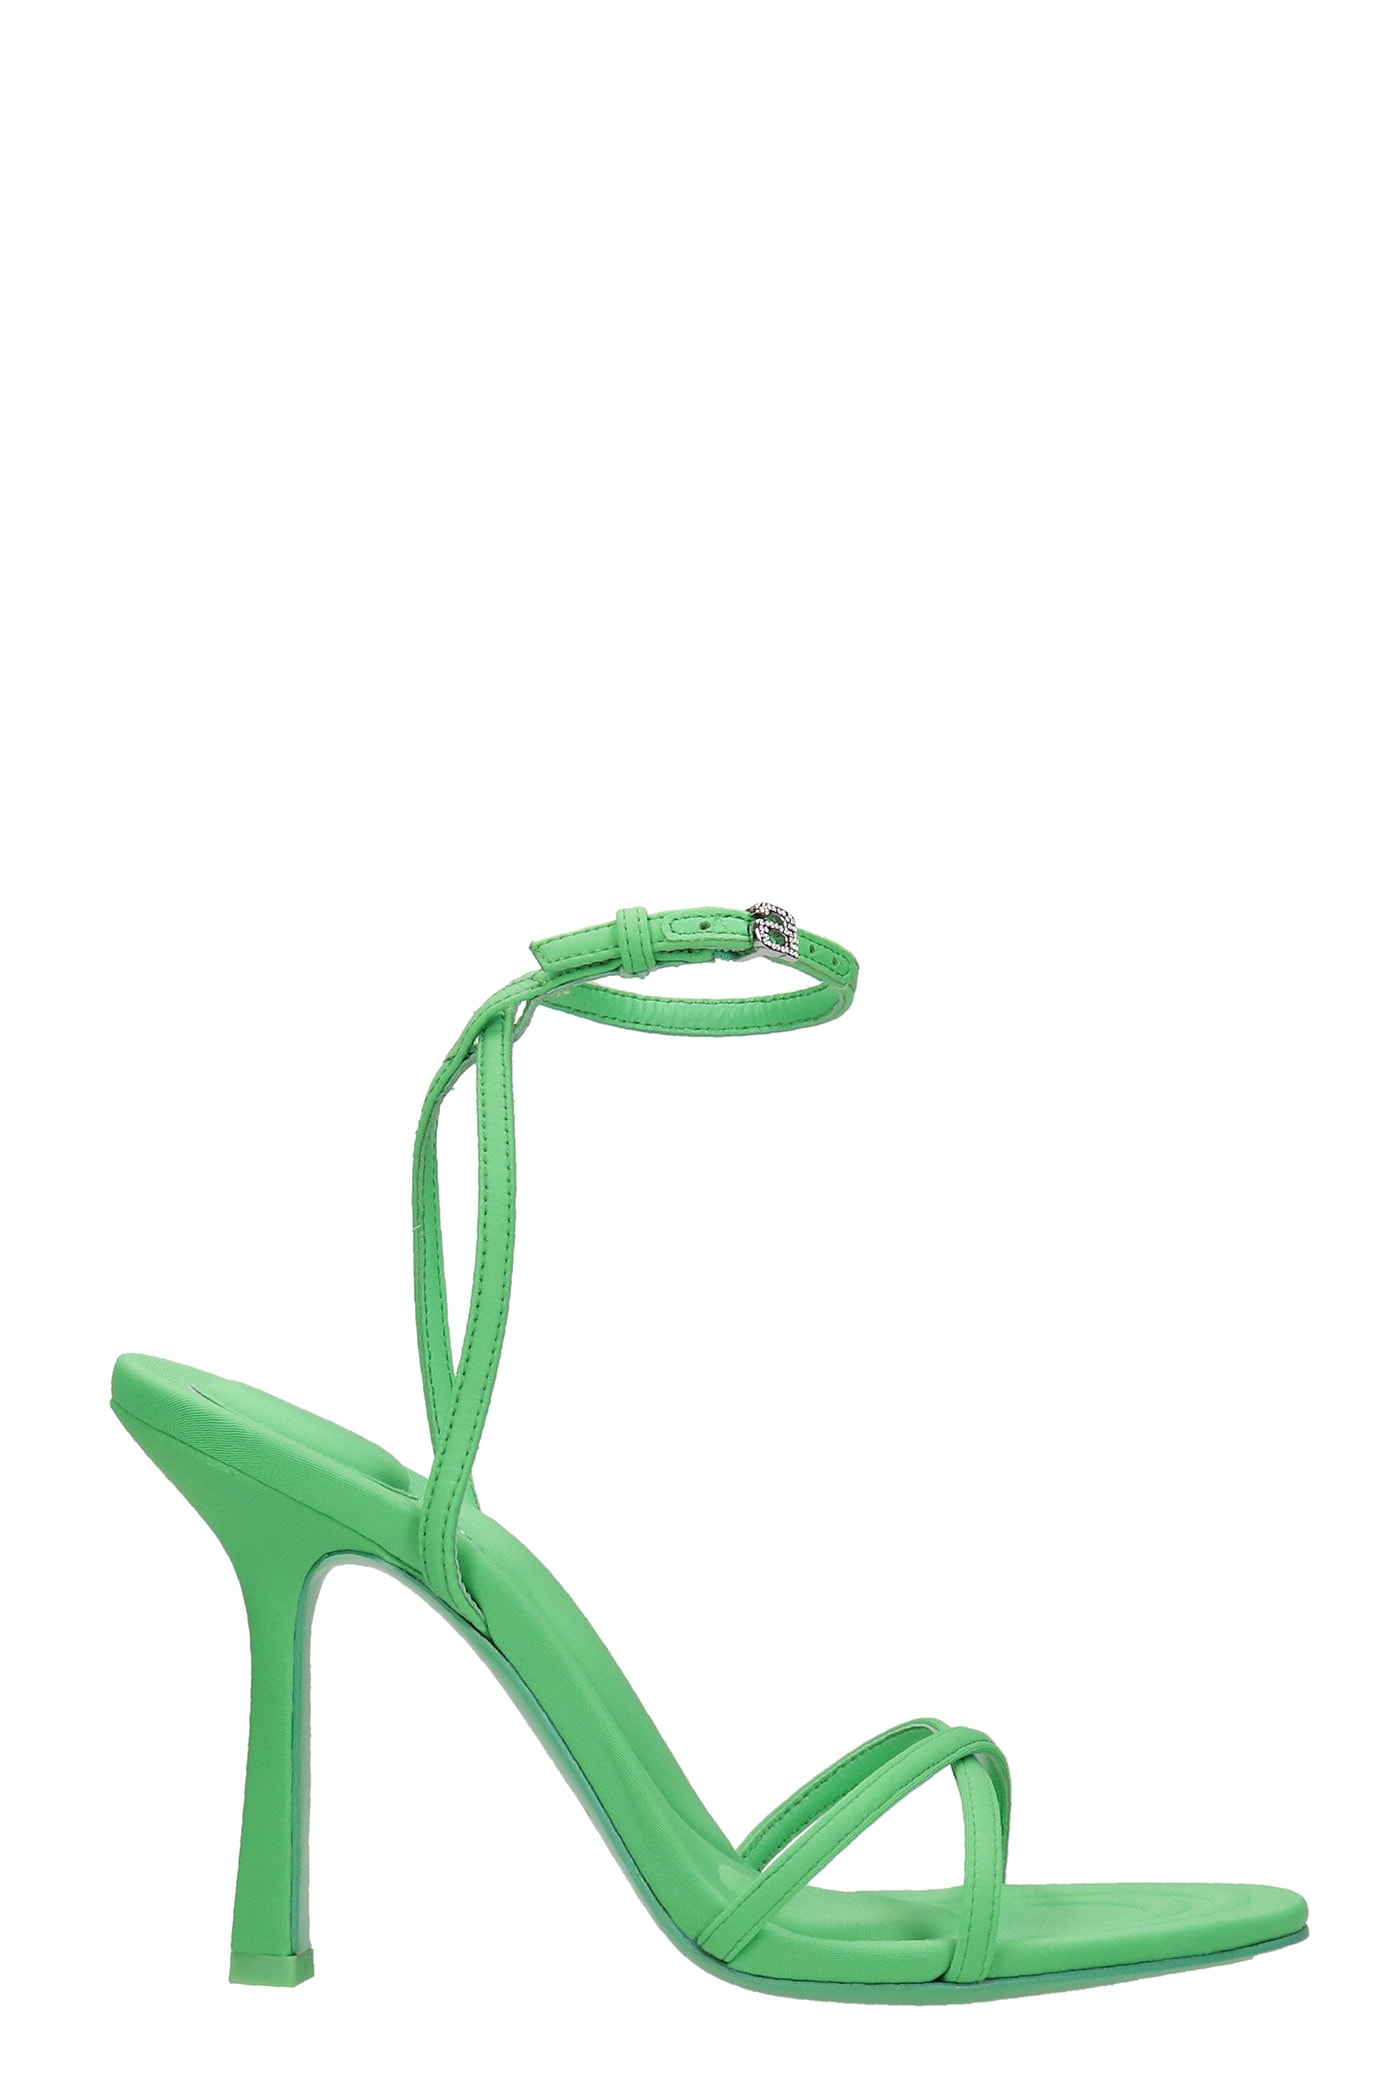 Alexander Wang Dahlia 105 Sandals In Green Leather